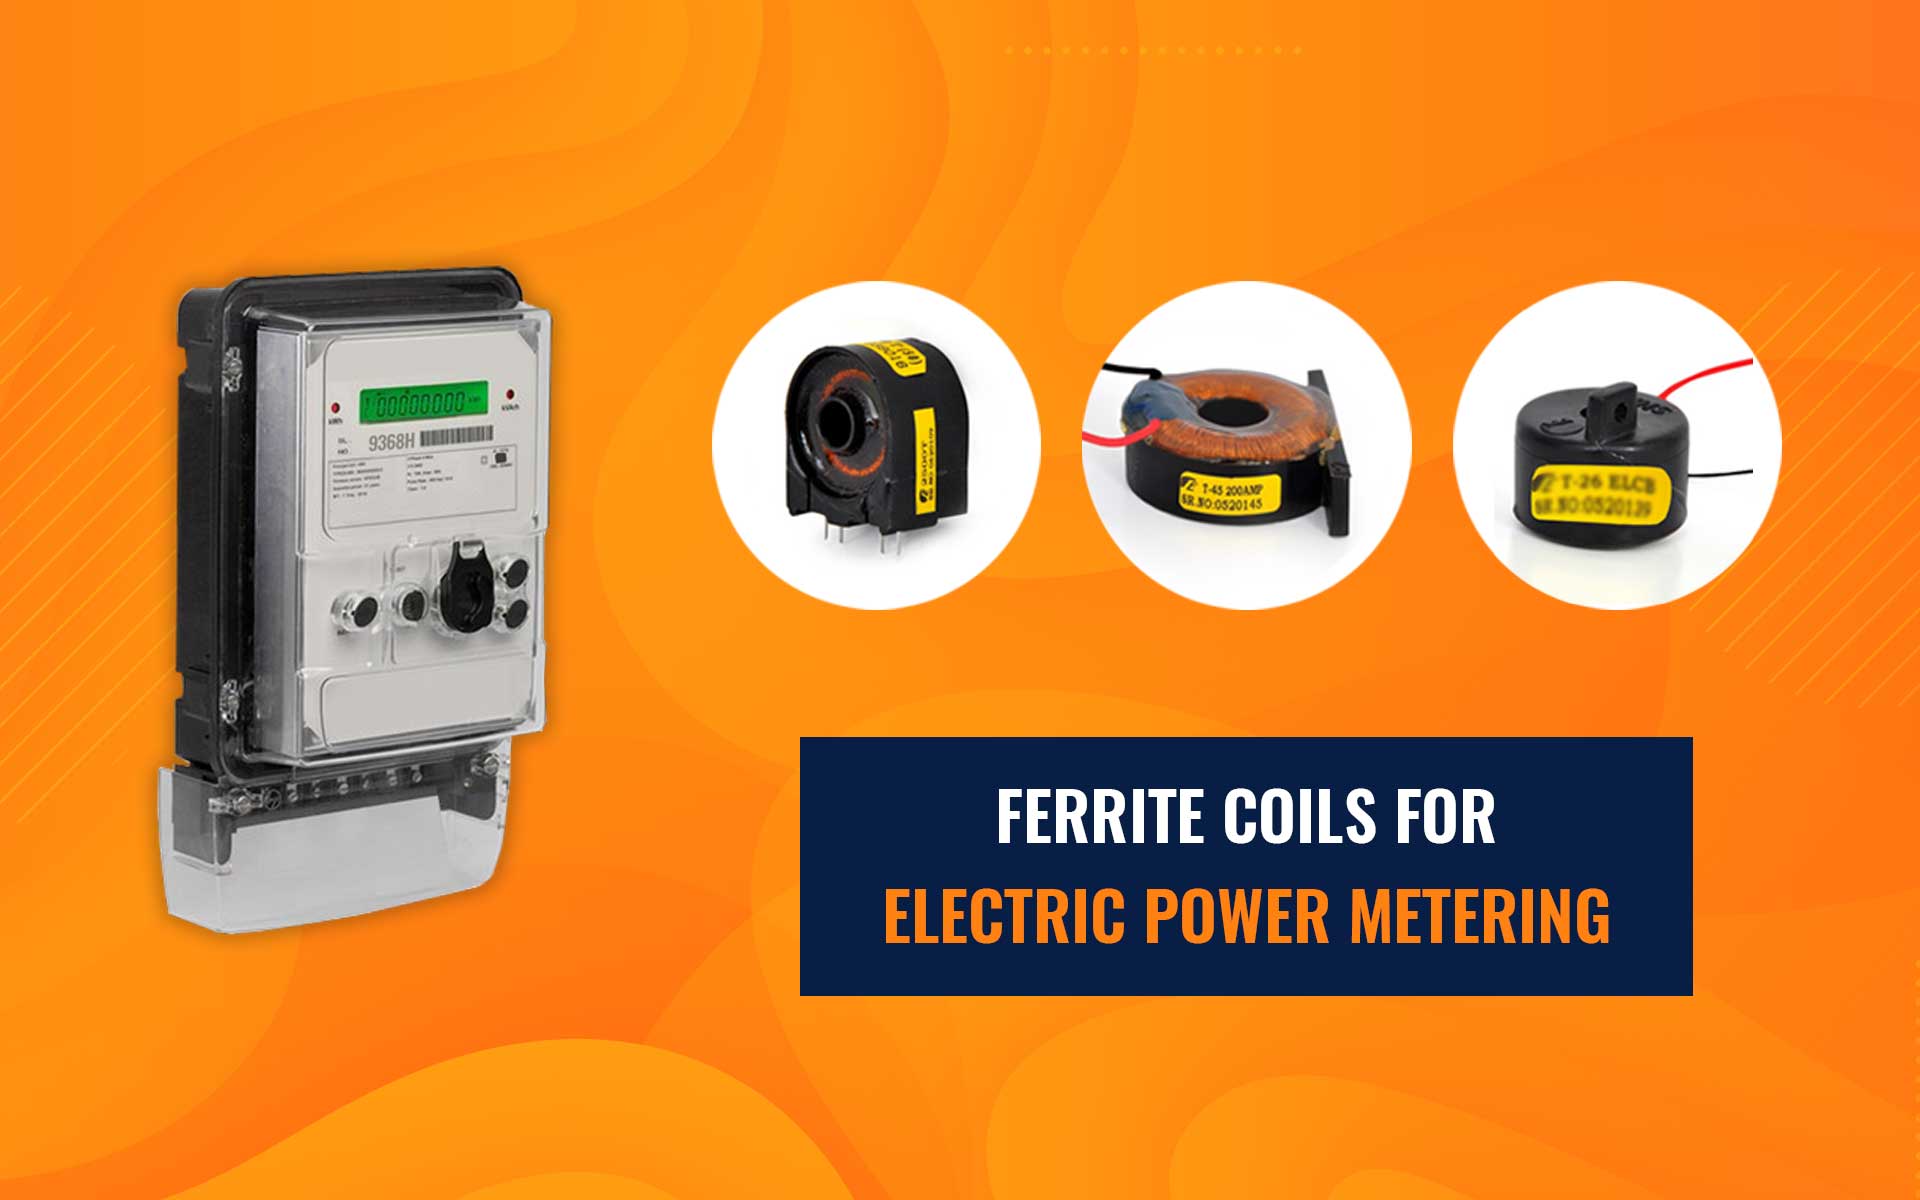 Ferrite Coils for Electric Power Metering